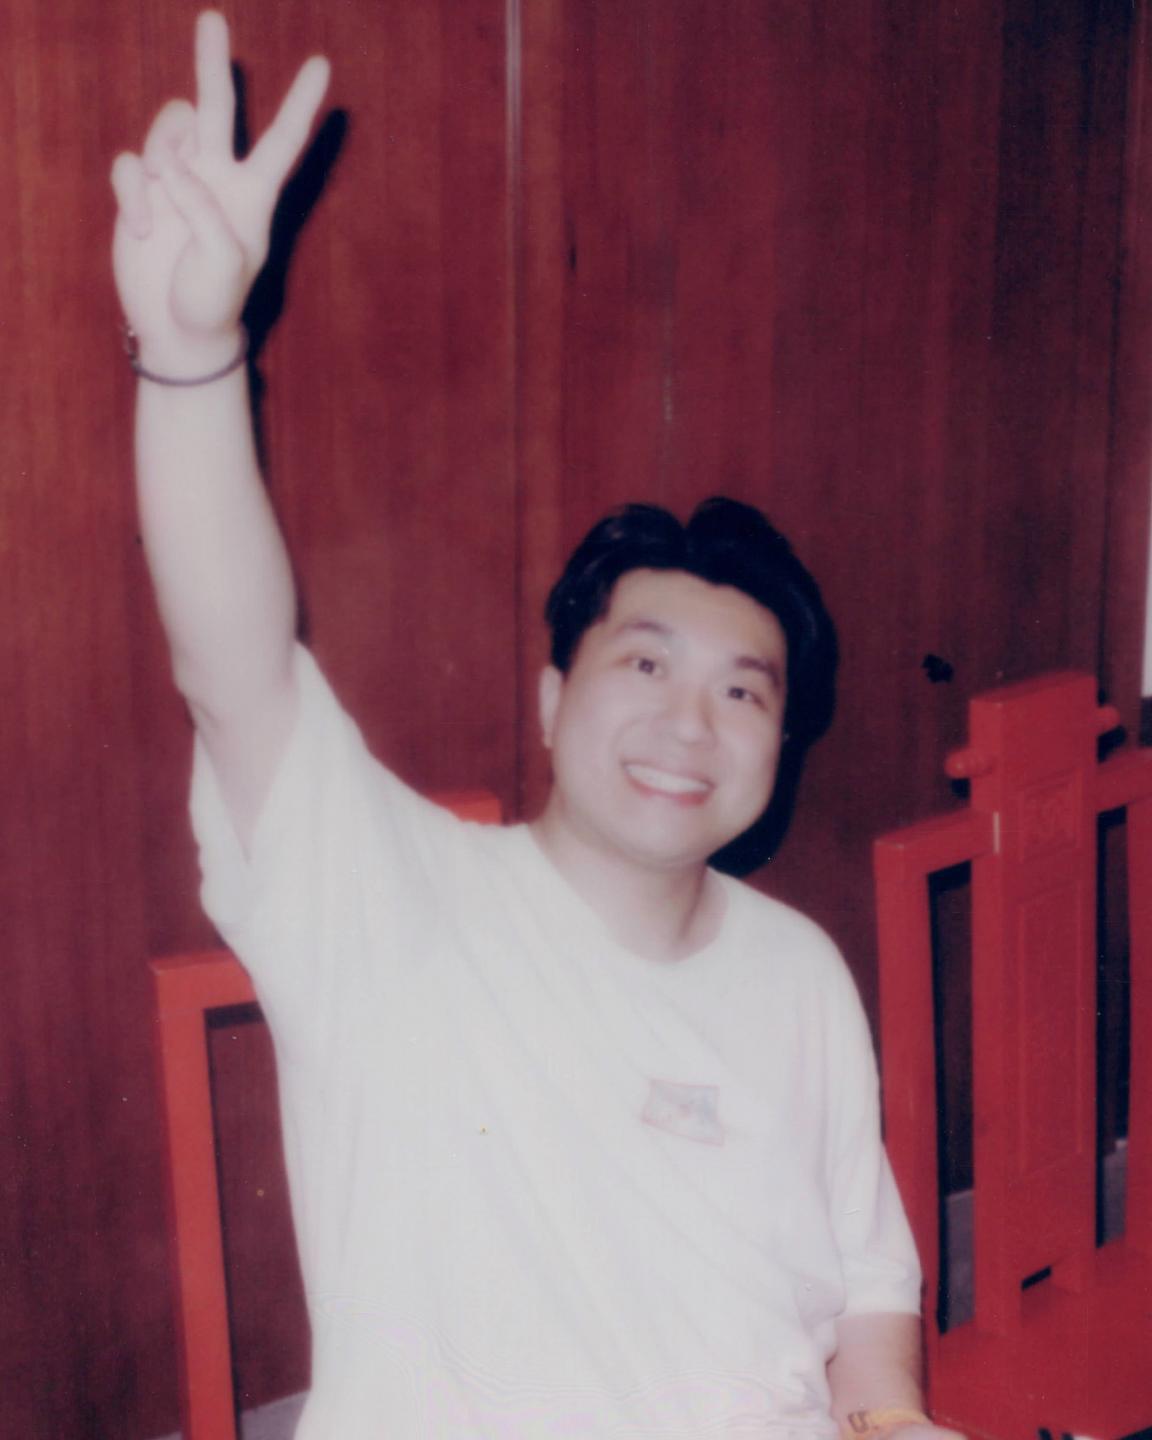 A film style photo of Anson giving the peace sign